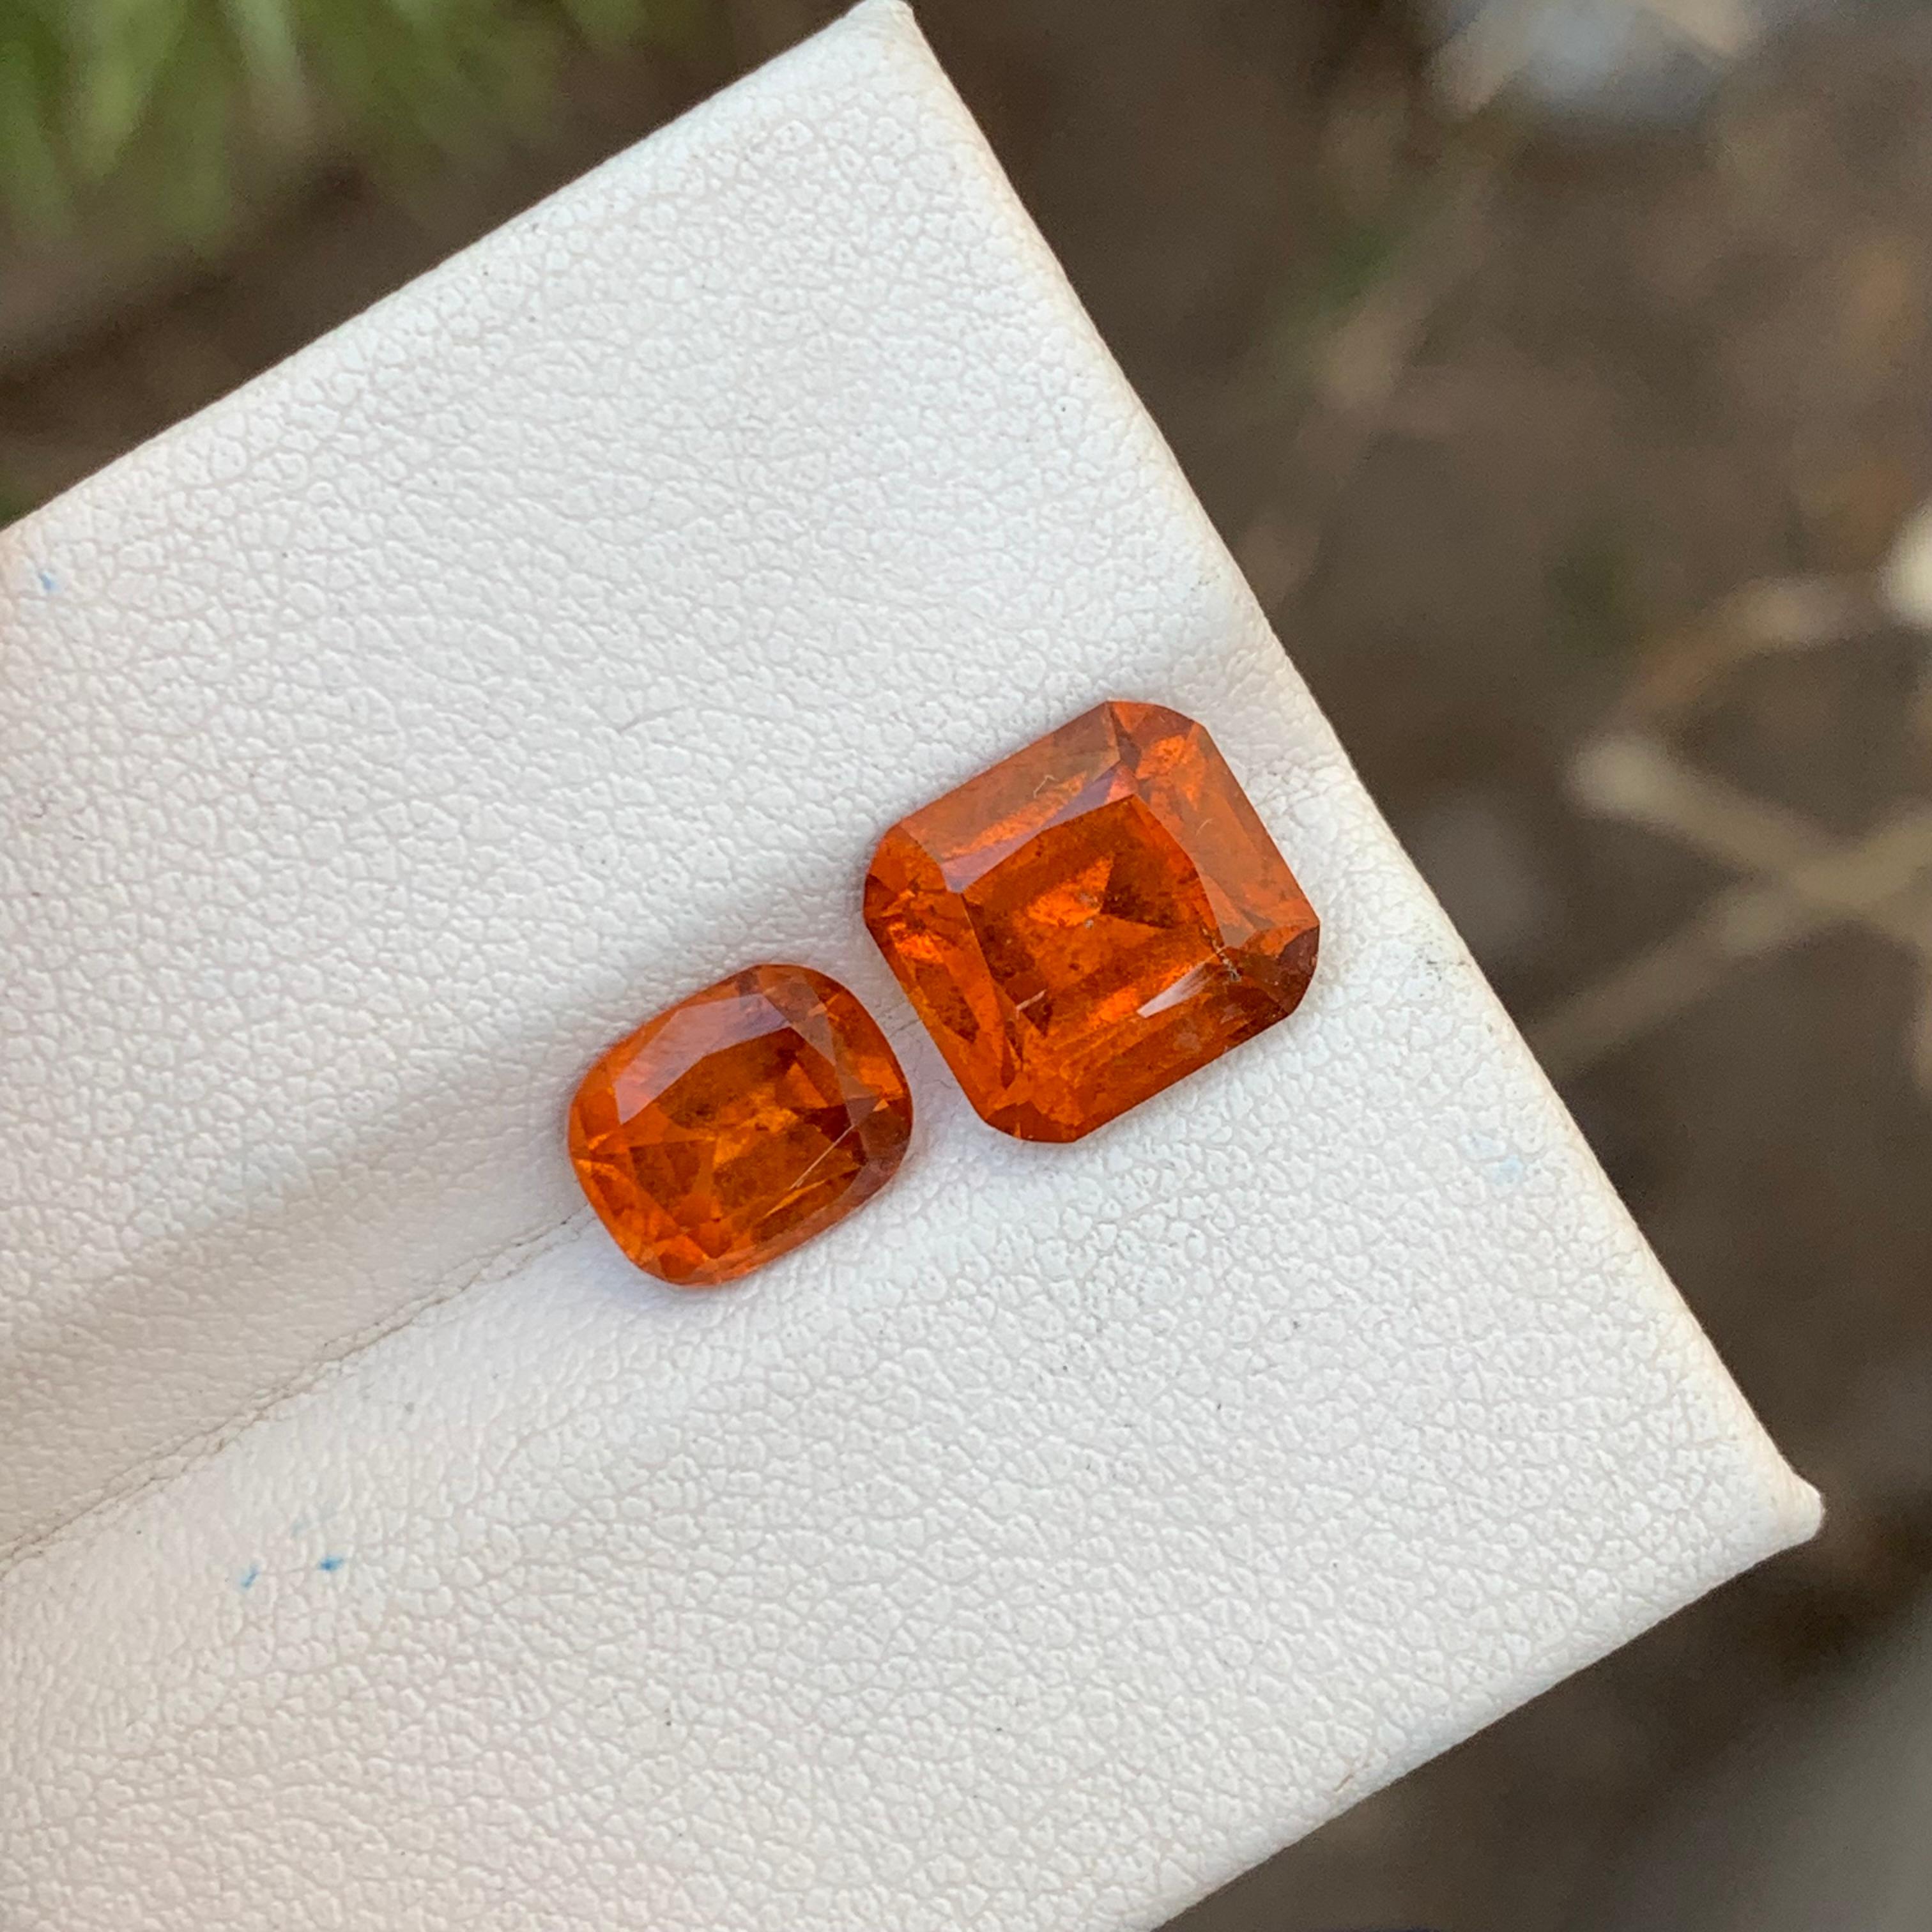 5.95 Carats Natural Loose Hessonite Garnet 2 Pieces For Ring Jewelry Making  For Sale 6